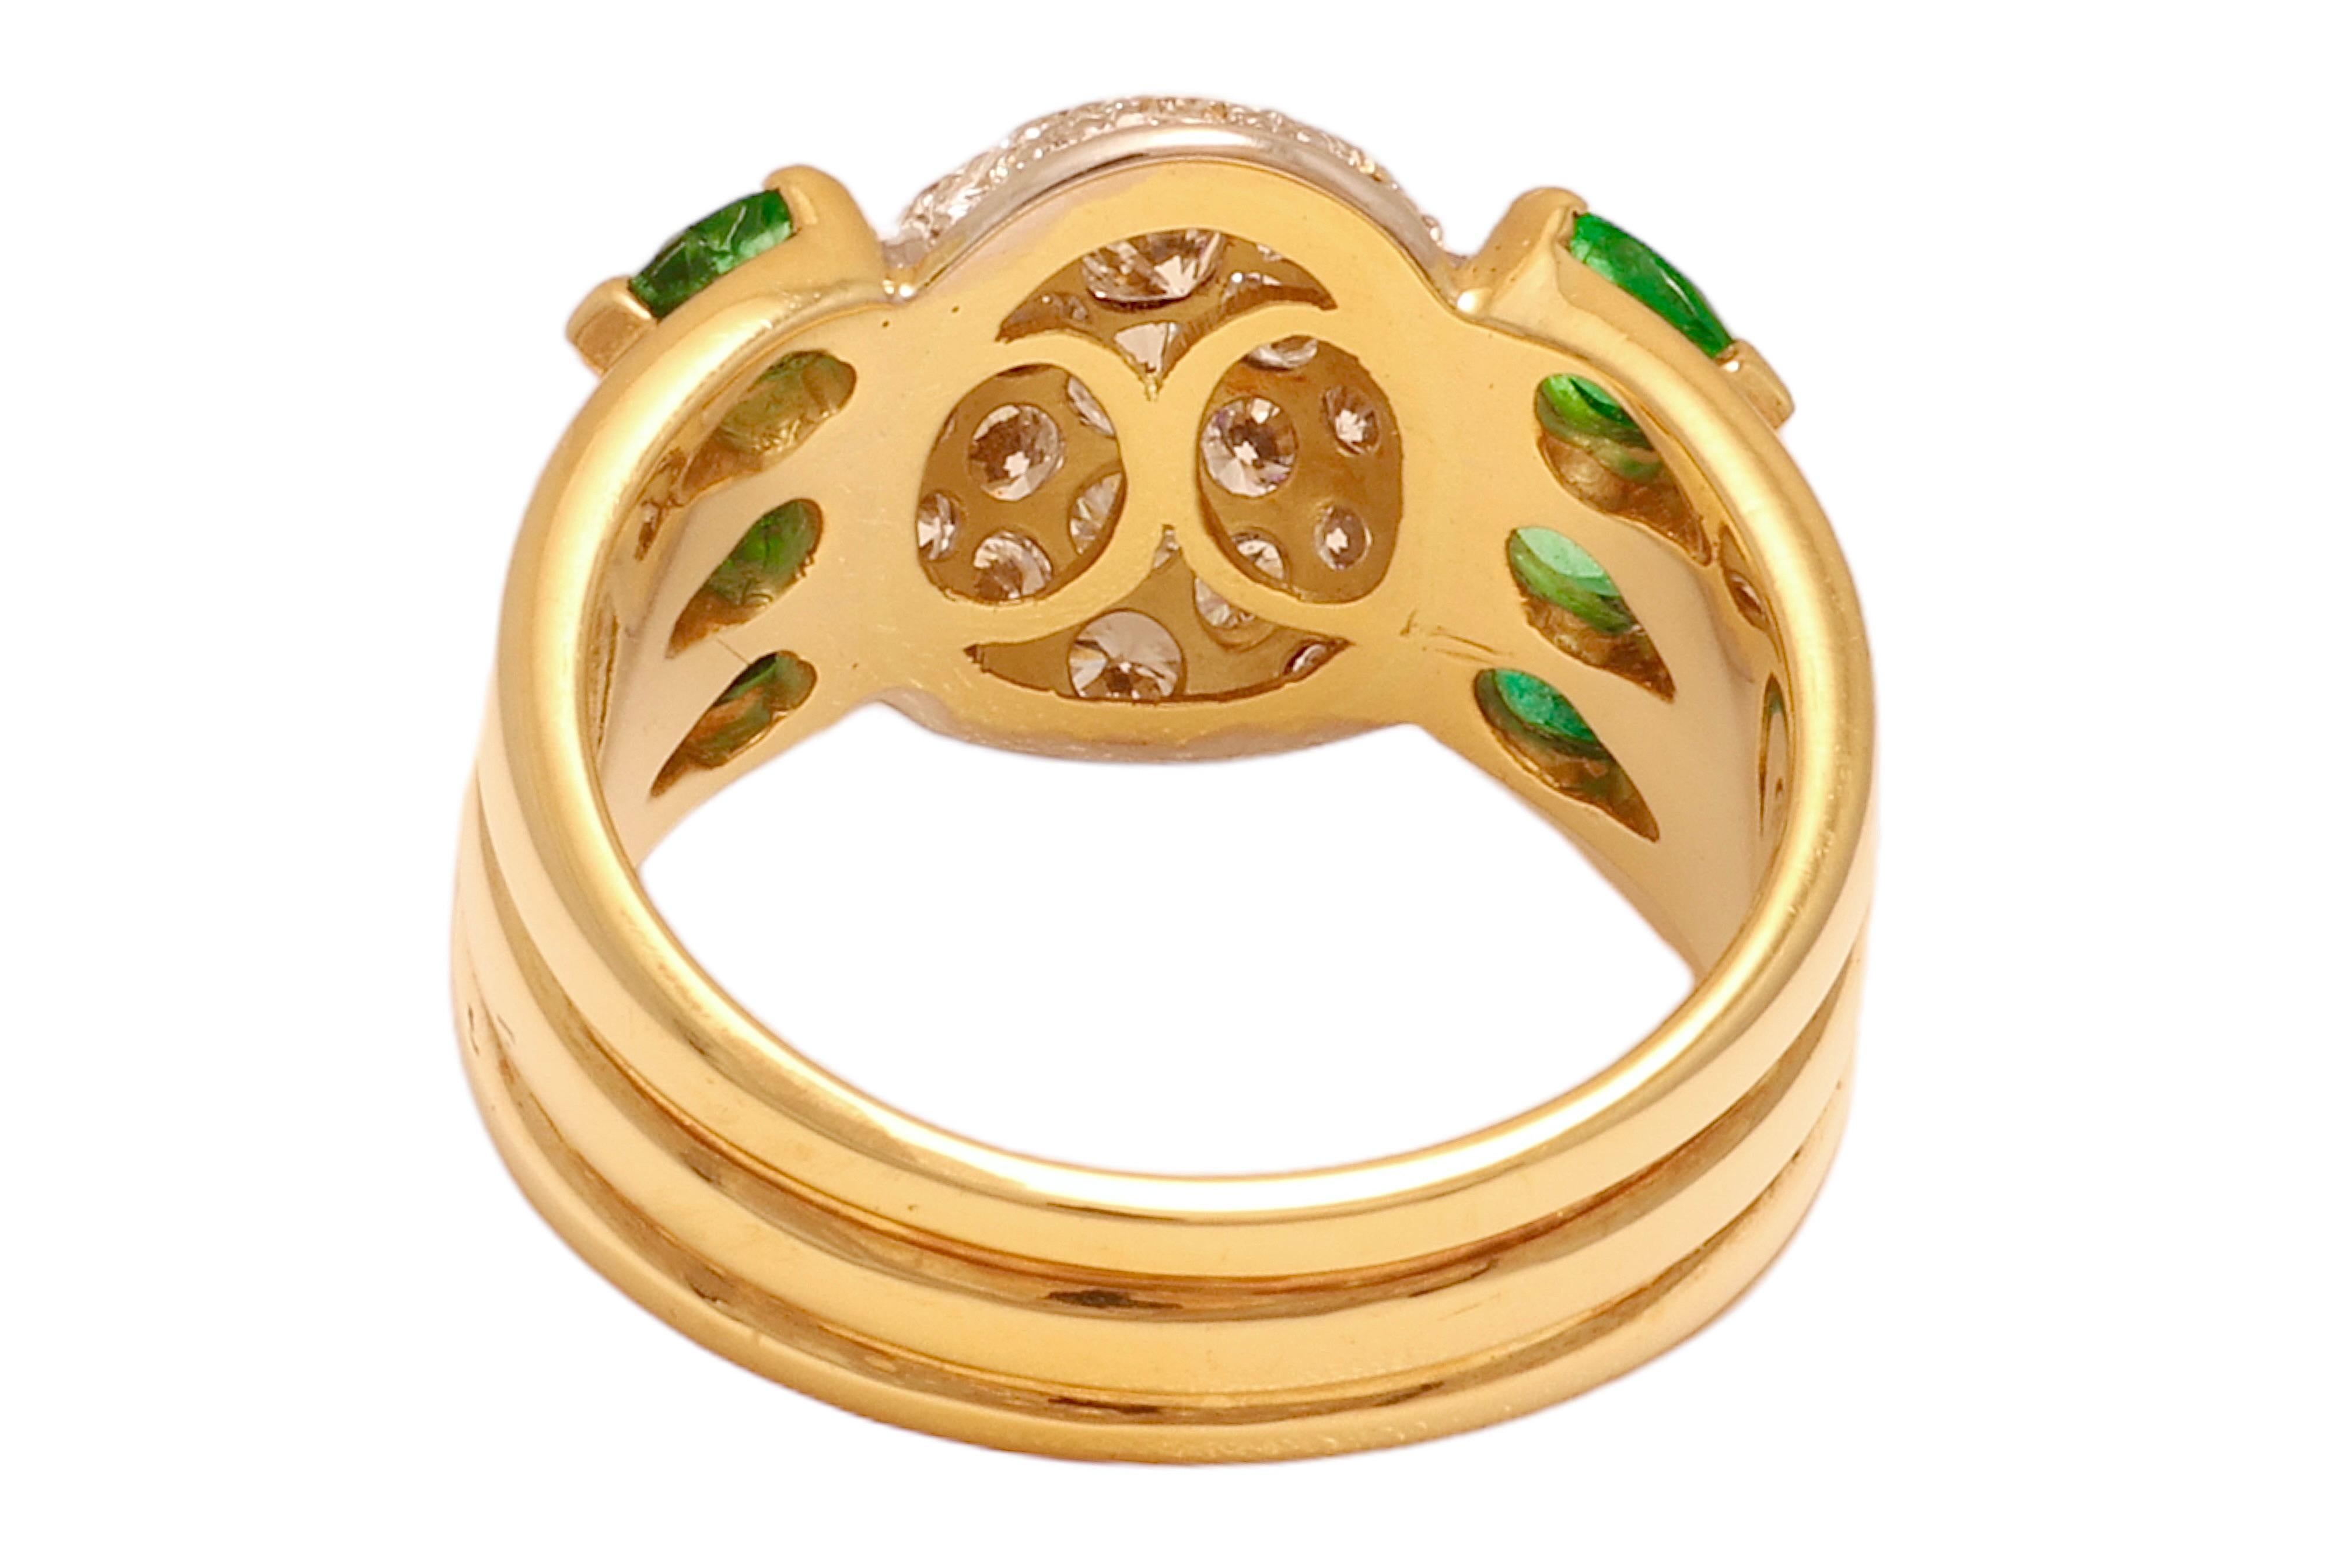 18 kt. Solid Gold Ring with 2.36 ct. Diamonds and 2 ct. Emerald For Sale 1